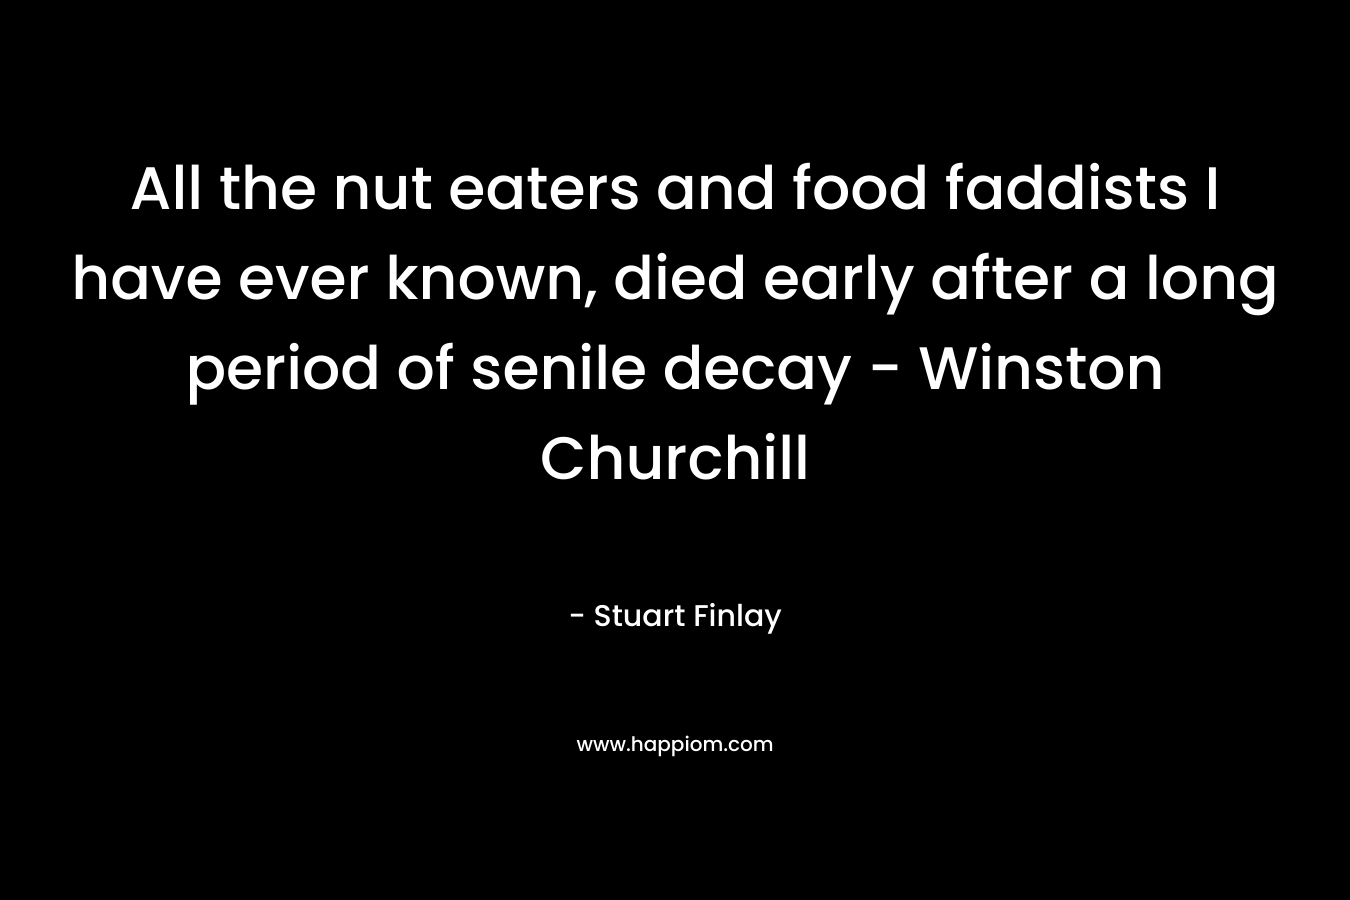 All the nut eaters and food faddists I have ever known, died early after a long period of senile decay – Winston Churchill – Stuart Finlay